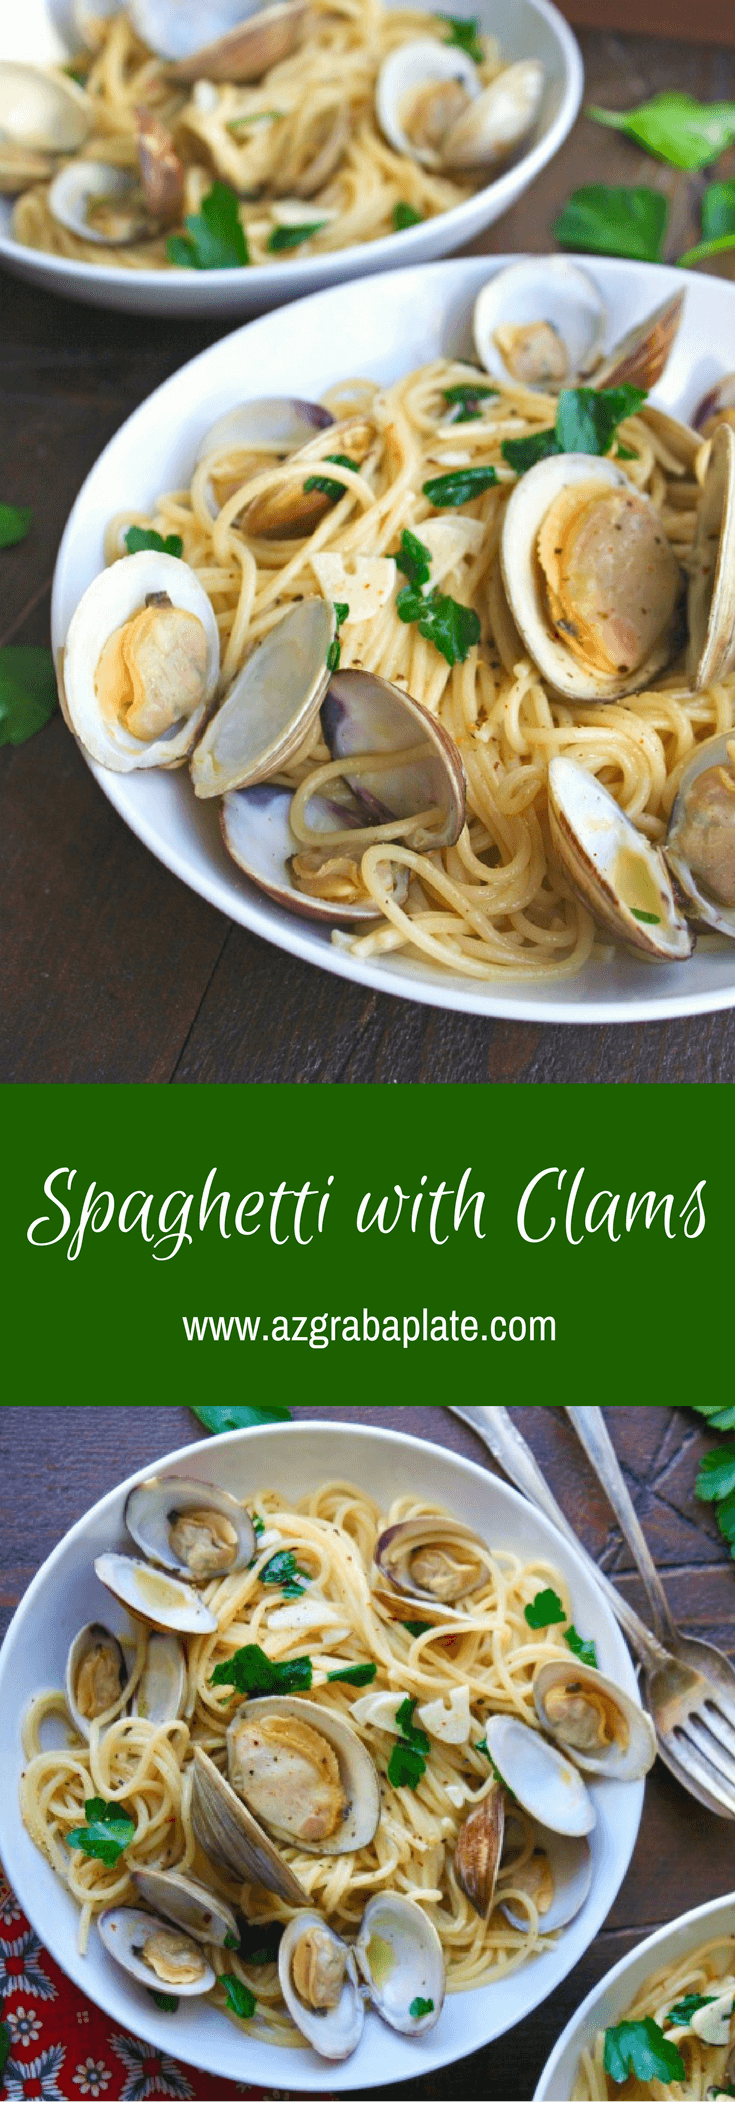 Spaghetti alle Vongole (Spaghetti with Clams) is a fabulous meal for a celebration!